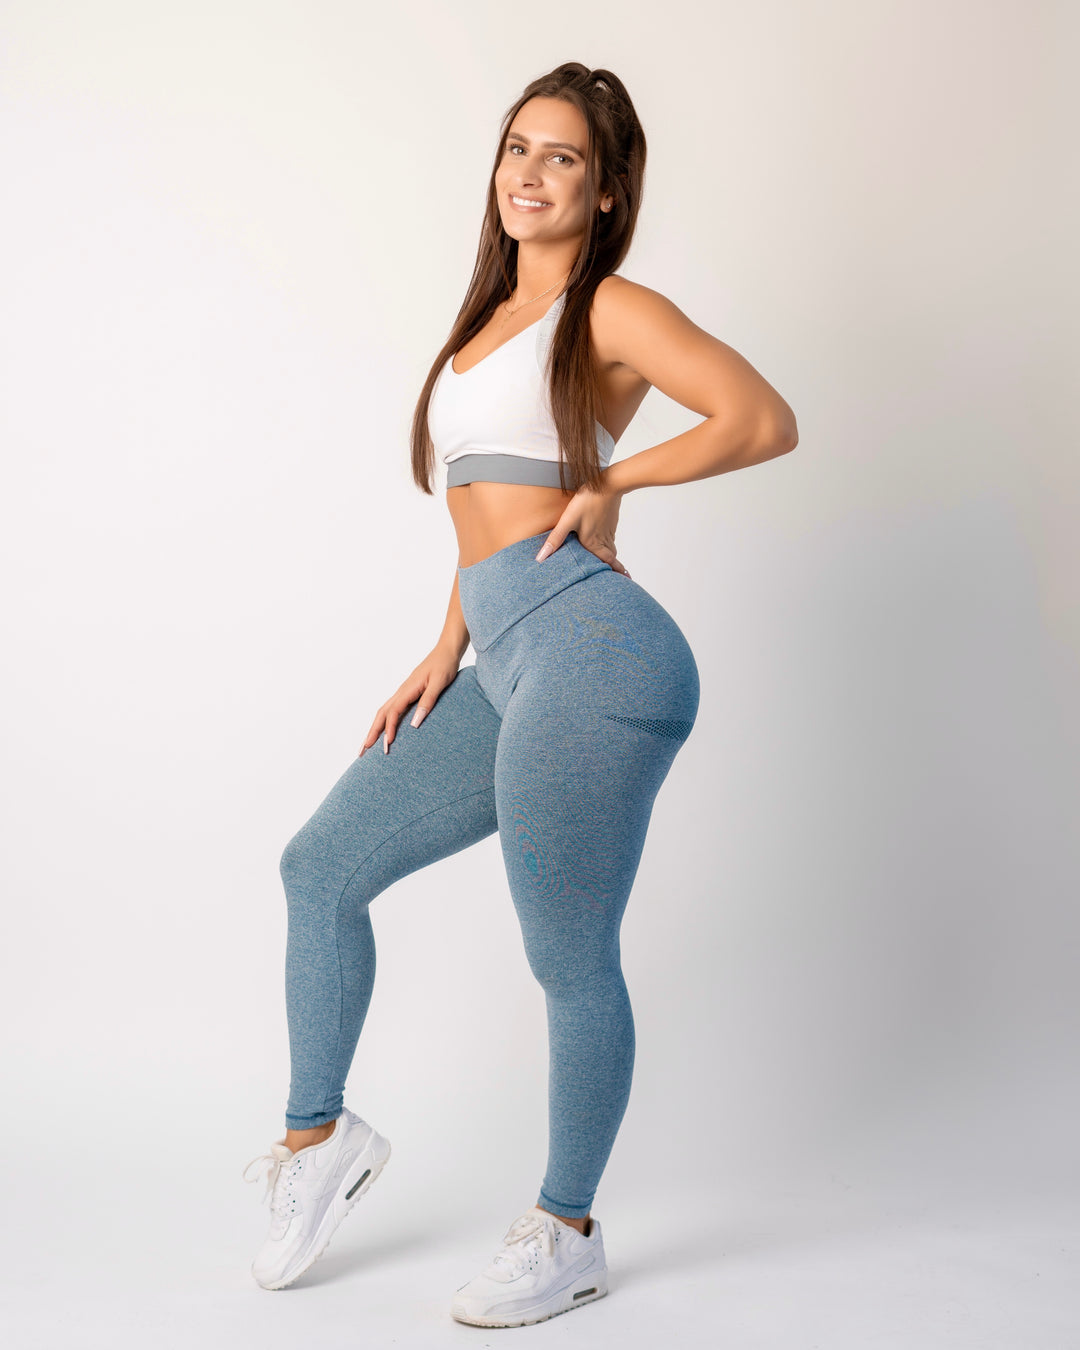 Allure Leggings Review  International Society of Precision